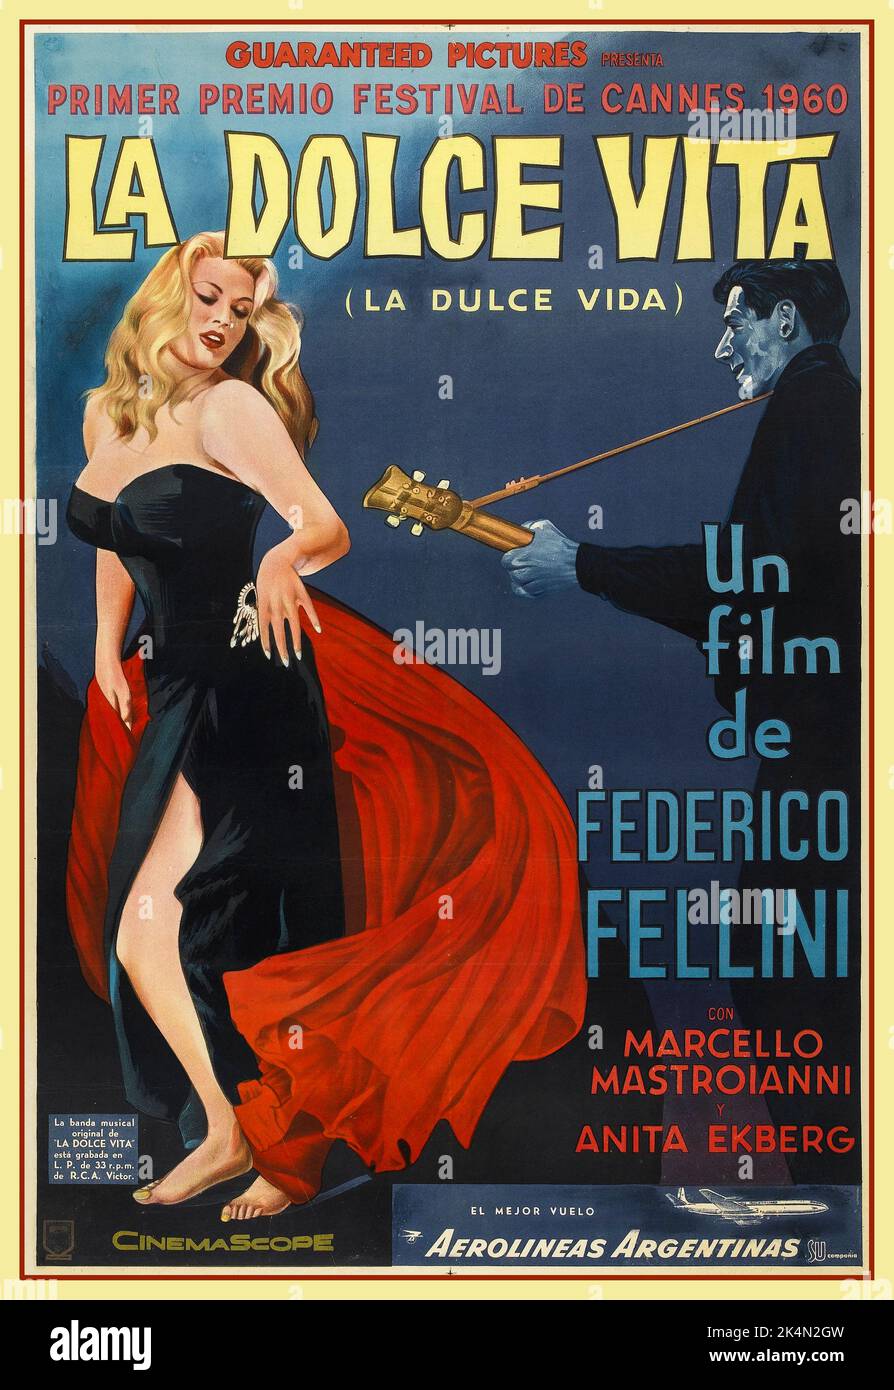 LA DOLCE VITA Vintage 1960's cinema film movie poster Italian for 'the sweet life' or 'the good life'  a 1960 comedy-drama film directed and co-written by Federico Fellini. The film follows Marcello Rubini (Marcello Mastroianni), a journalist writing for gossip magazines, on his journey through the 'sweet life' of Rome in a fruitless search for love and happiness. The screenplay, was co-written by Fellini and three other screenwriters. Festival de Cannes 1960 Stock Photo